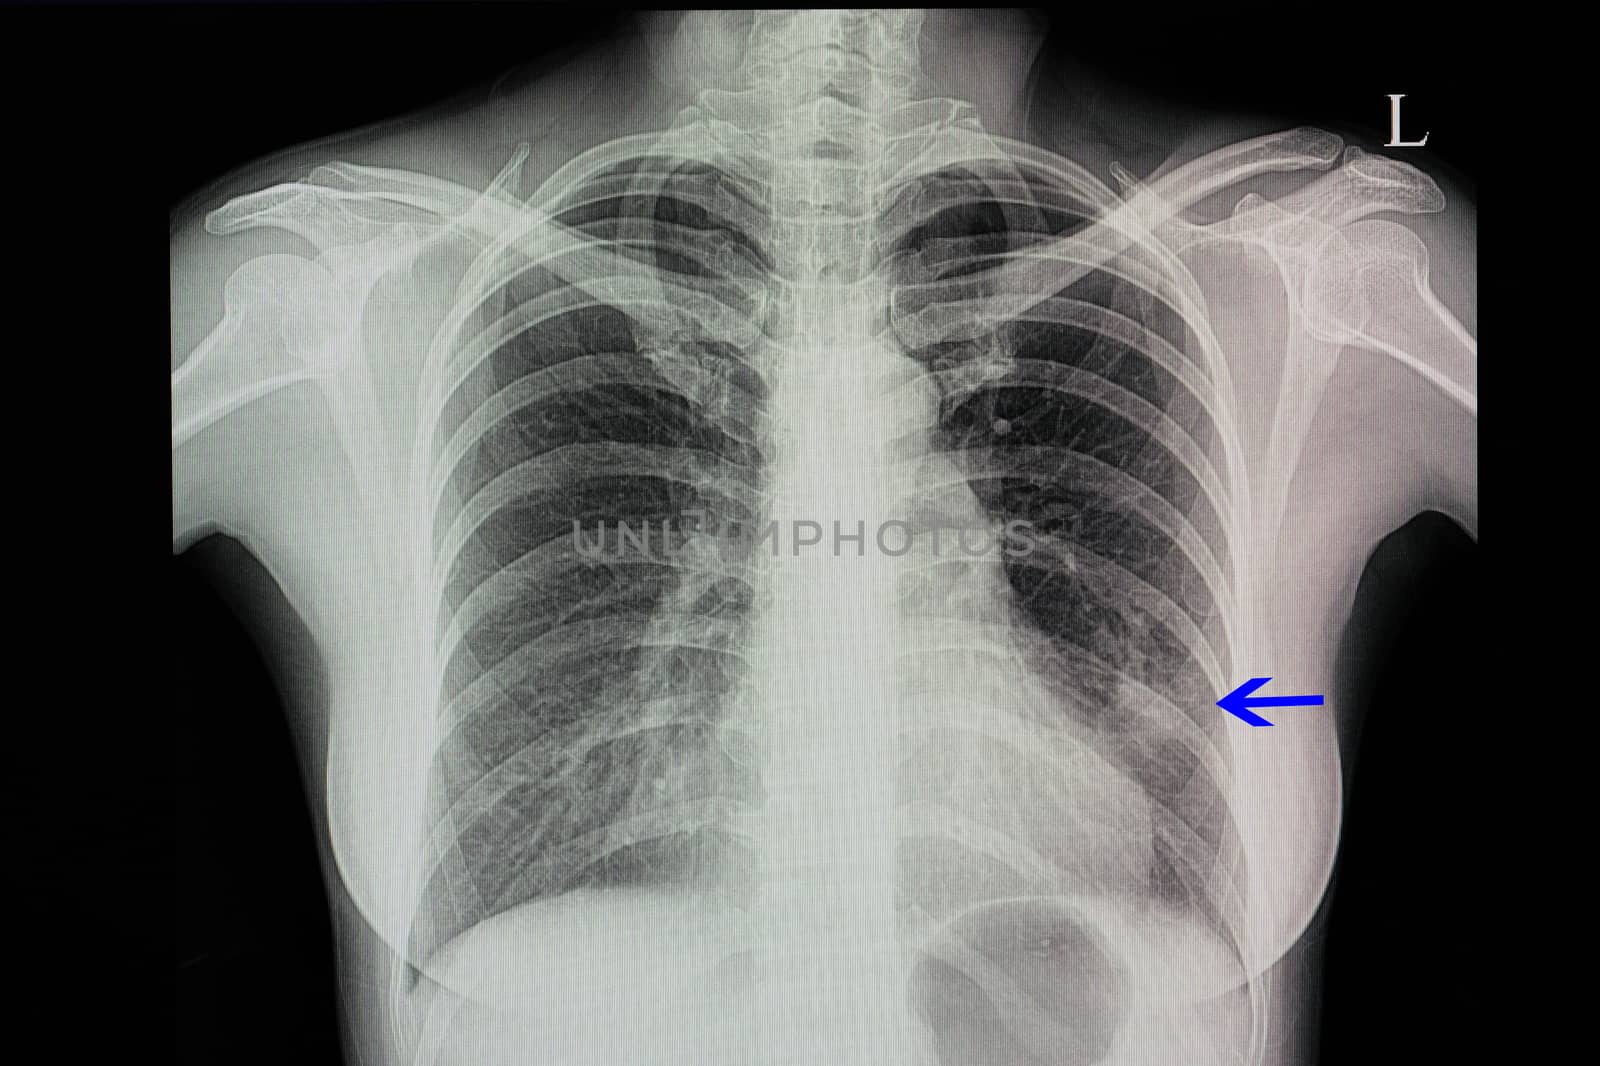 a chest x-ray of a patient with pneumonia with left lower lung infiltration